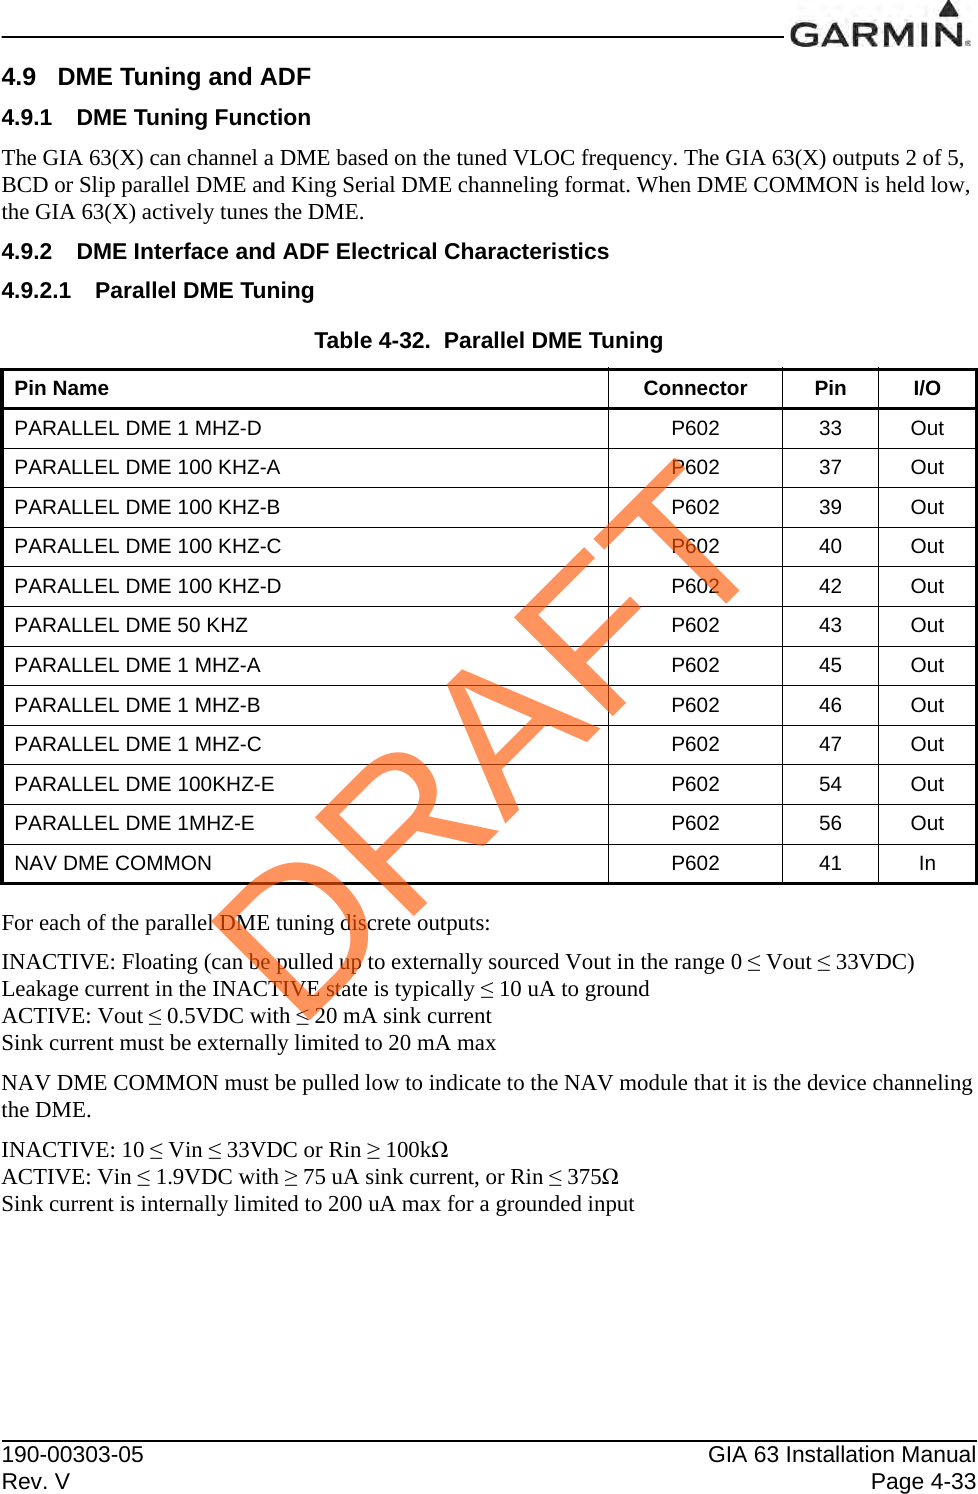 190-00303-05 GIA 63 Installation ManualRev. V Page 4-334.9 DME Tuning and ADF4.9.1 DME Tuning FunctionThe GIA 63(X) can channel a DME based on the tuned VLOC frequency. The GIA 63(X) outputs 2 of 5, BCD or Slip parallel DME and King Serial DME channeling format. When DME COMMON is held low, the GIA 63(X) actively tunes the DME.4.9.2 DME Interface and ADF Electrical Characteristics4.9.2.1 Parallel DME TuningFor each of the parallel DME tuning discrete outputs:INACTIVE: Floating (can be pulled up to externally sourced Vout in the range 0 ≤ Vout ≤ 33VDC)Leakage current in the INACTIVE state is typically ≤ 10 uA to groundACTIVE: Vout ≤ 0.5VDC with ≤ 20 mA sink currentSink current must be externally limited to 20 mA maxNAV DME COMMON must be pulled low to indicate to the NAV module that it is the device channelingthe DME.INACTIVE: 10 ≤ Vin ≤ 33VDC or Rin ≥ 100kΩACTIVE: Vin ≤ 1.9VDC with ≥ 75 uA sink current, or Rin ≤ 375ΩSink current is internally limited to 200 uA max for a grounded inputTable 4-32.  Parallel DME TuningPin Name Connector Pin I/OPARALLEL DME 1 MHZ-D P602 33 OutPARALLEL DME 100 KHZ-A P602 37 OutPARALLEL DME 100 KHZ-B P602 39 OutPARALLEL DME 100 KHZ-C P602 40 OutPARALLEL DME 100 KHZ-D P602 42 OutPARALLEL DME 50 KHZ P602 43 OutPARALLEL DME 1 MHZ-A P602 45 OutPARALLEL DME 1 MHZ-B P602 46 OutPARALLEL DME 1 MHZ-C P602 47 OutPARALLEL DME 100KHZ-E P602 54 OutPARALLEL DME 1MHZ-E P602 56 OutNAV DME COMMON P602 41 InDRAFT